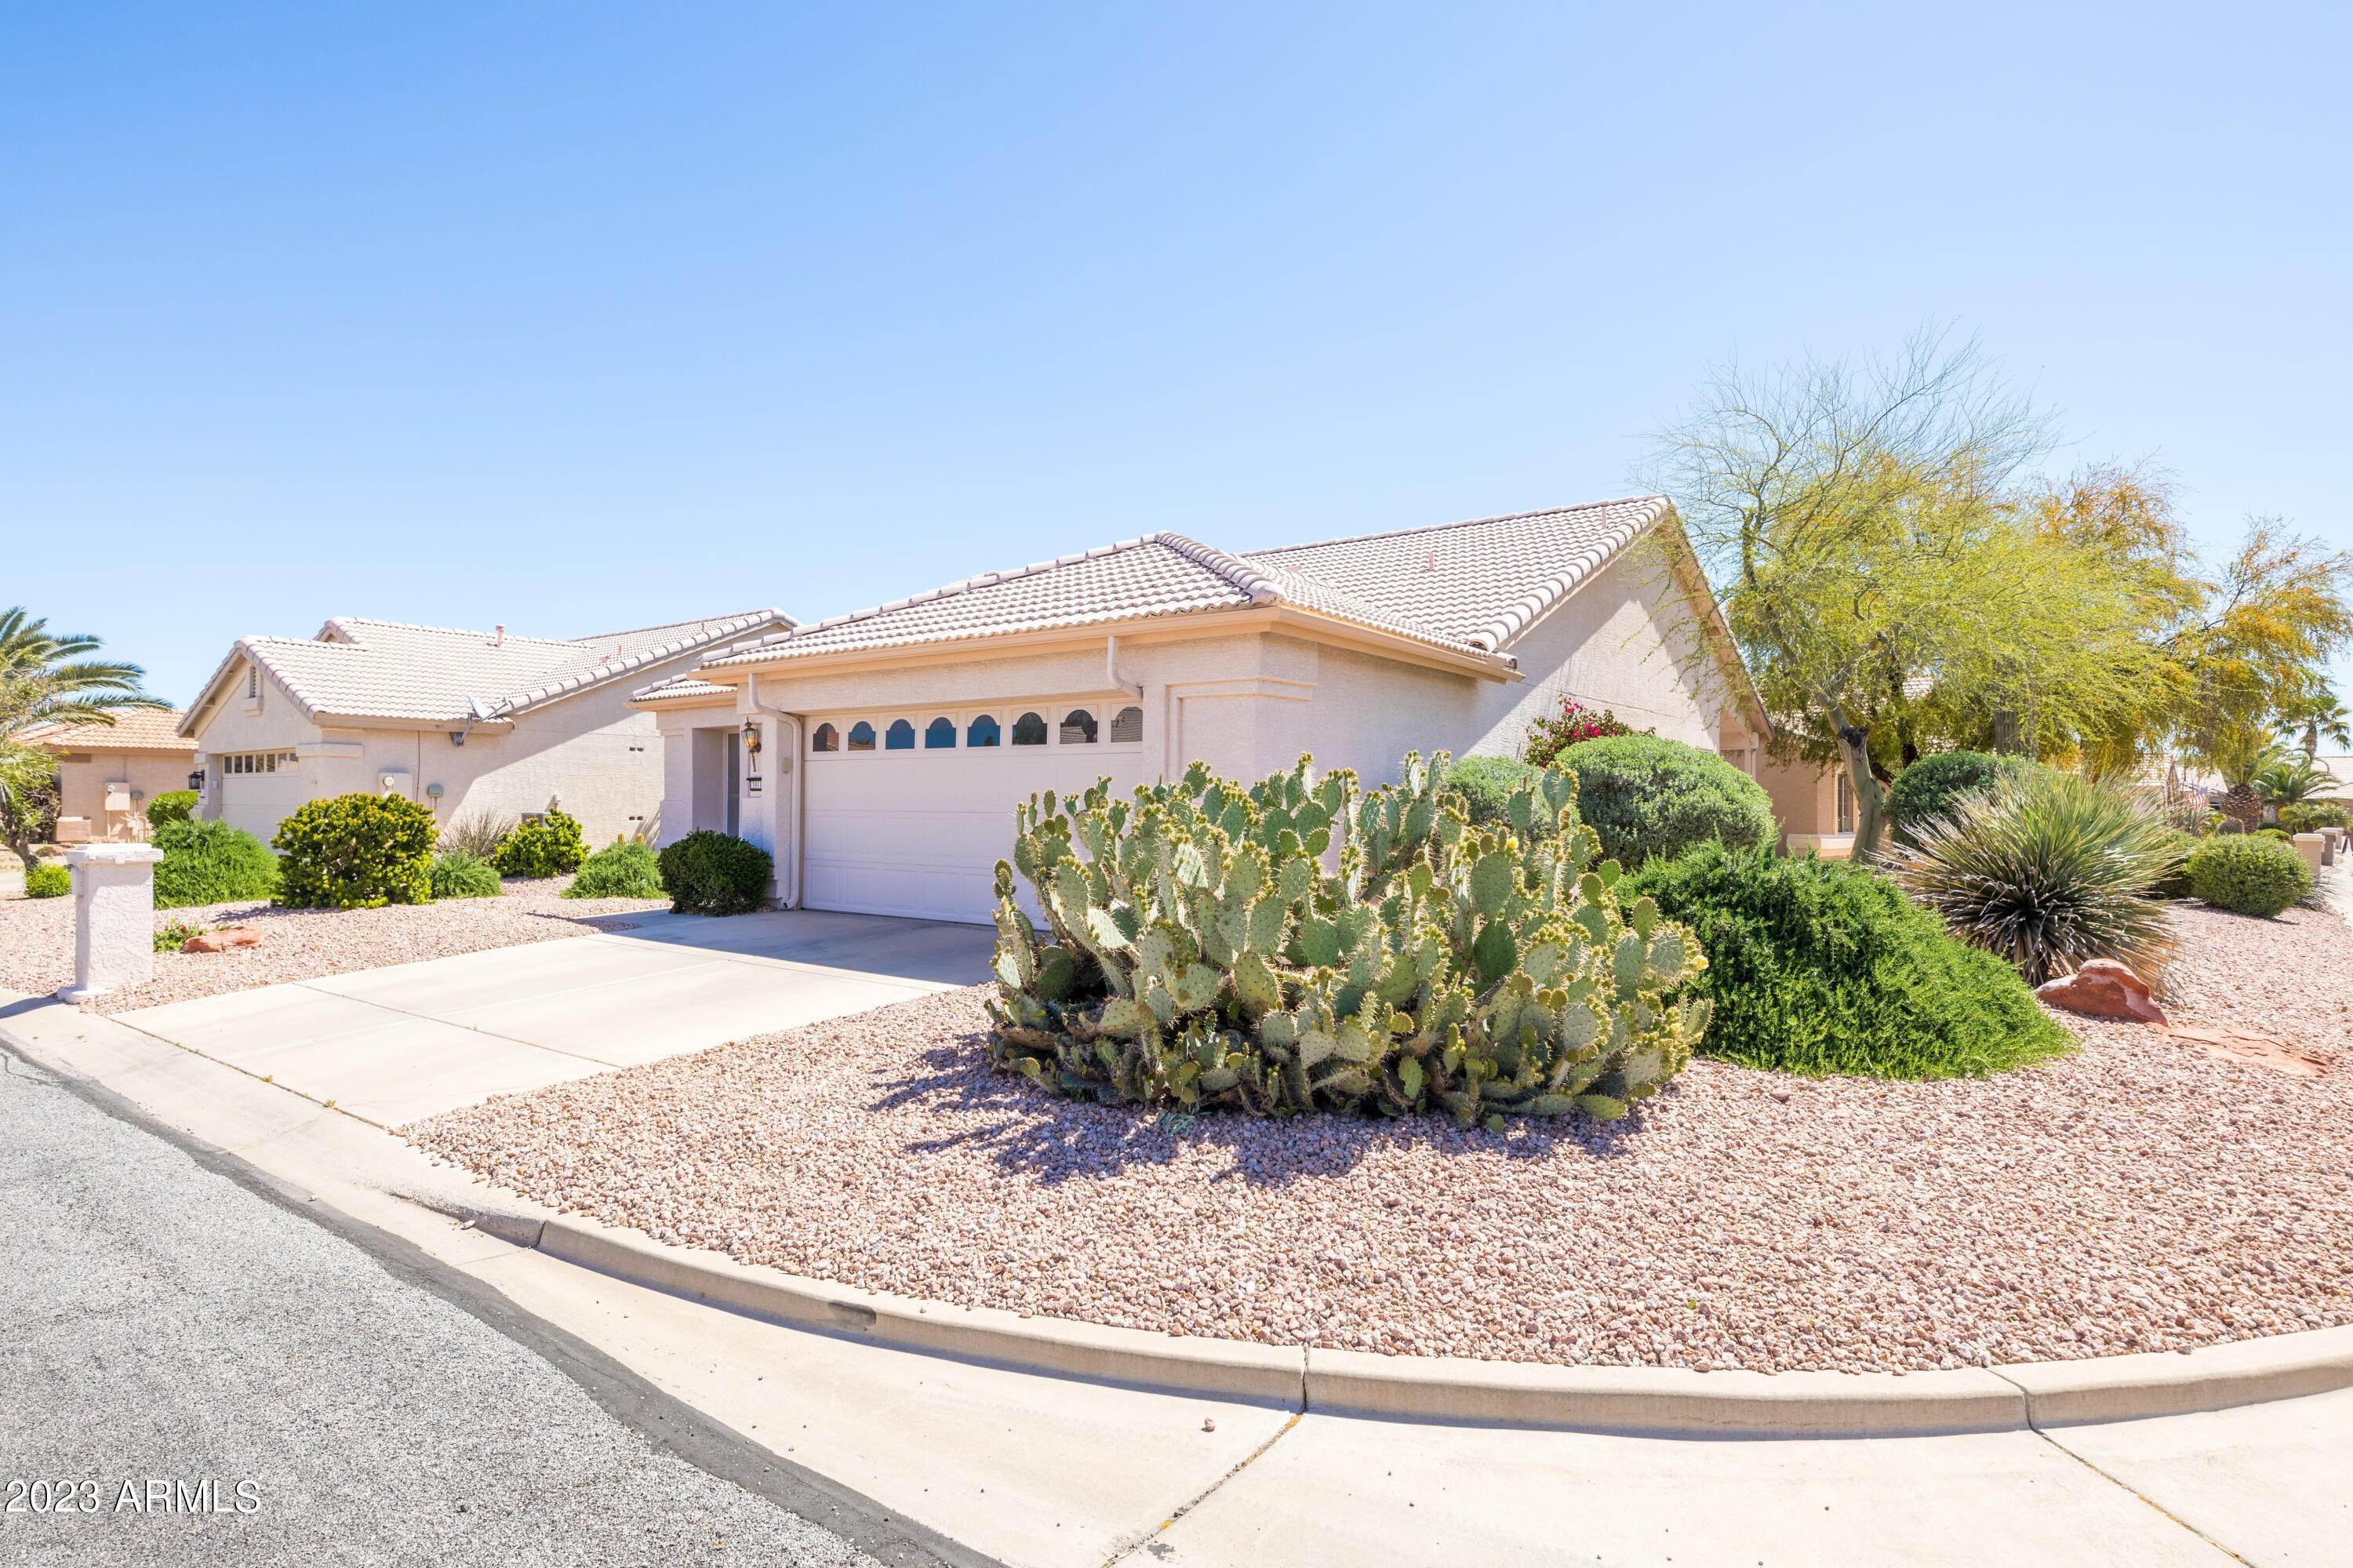 18. Single Family for Sale at Goodyear, AZ 85395